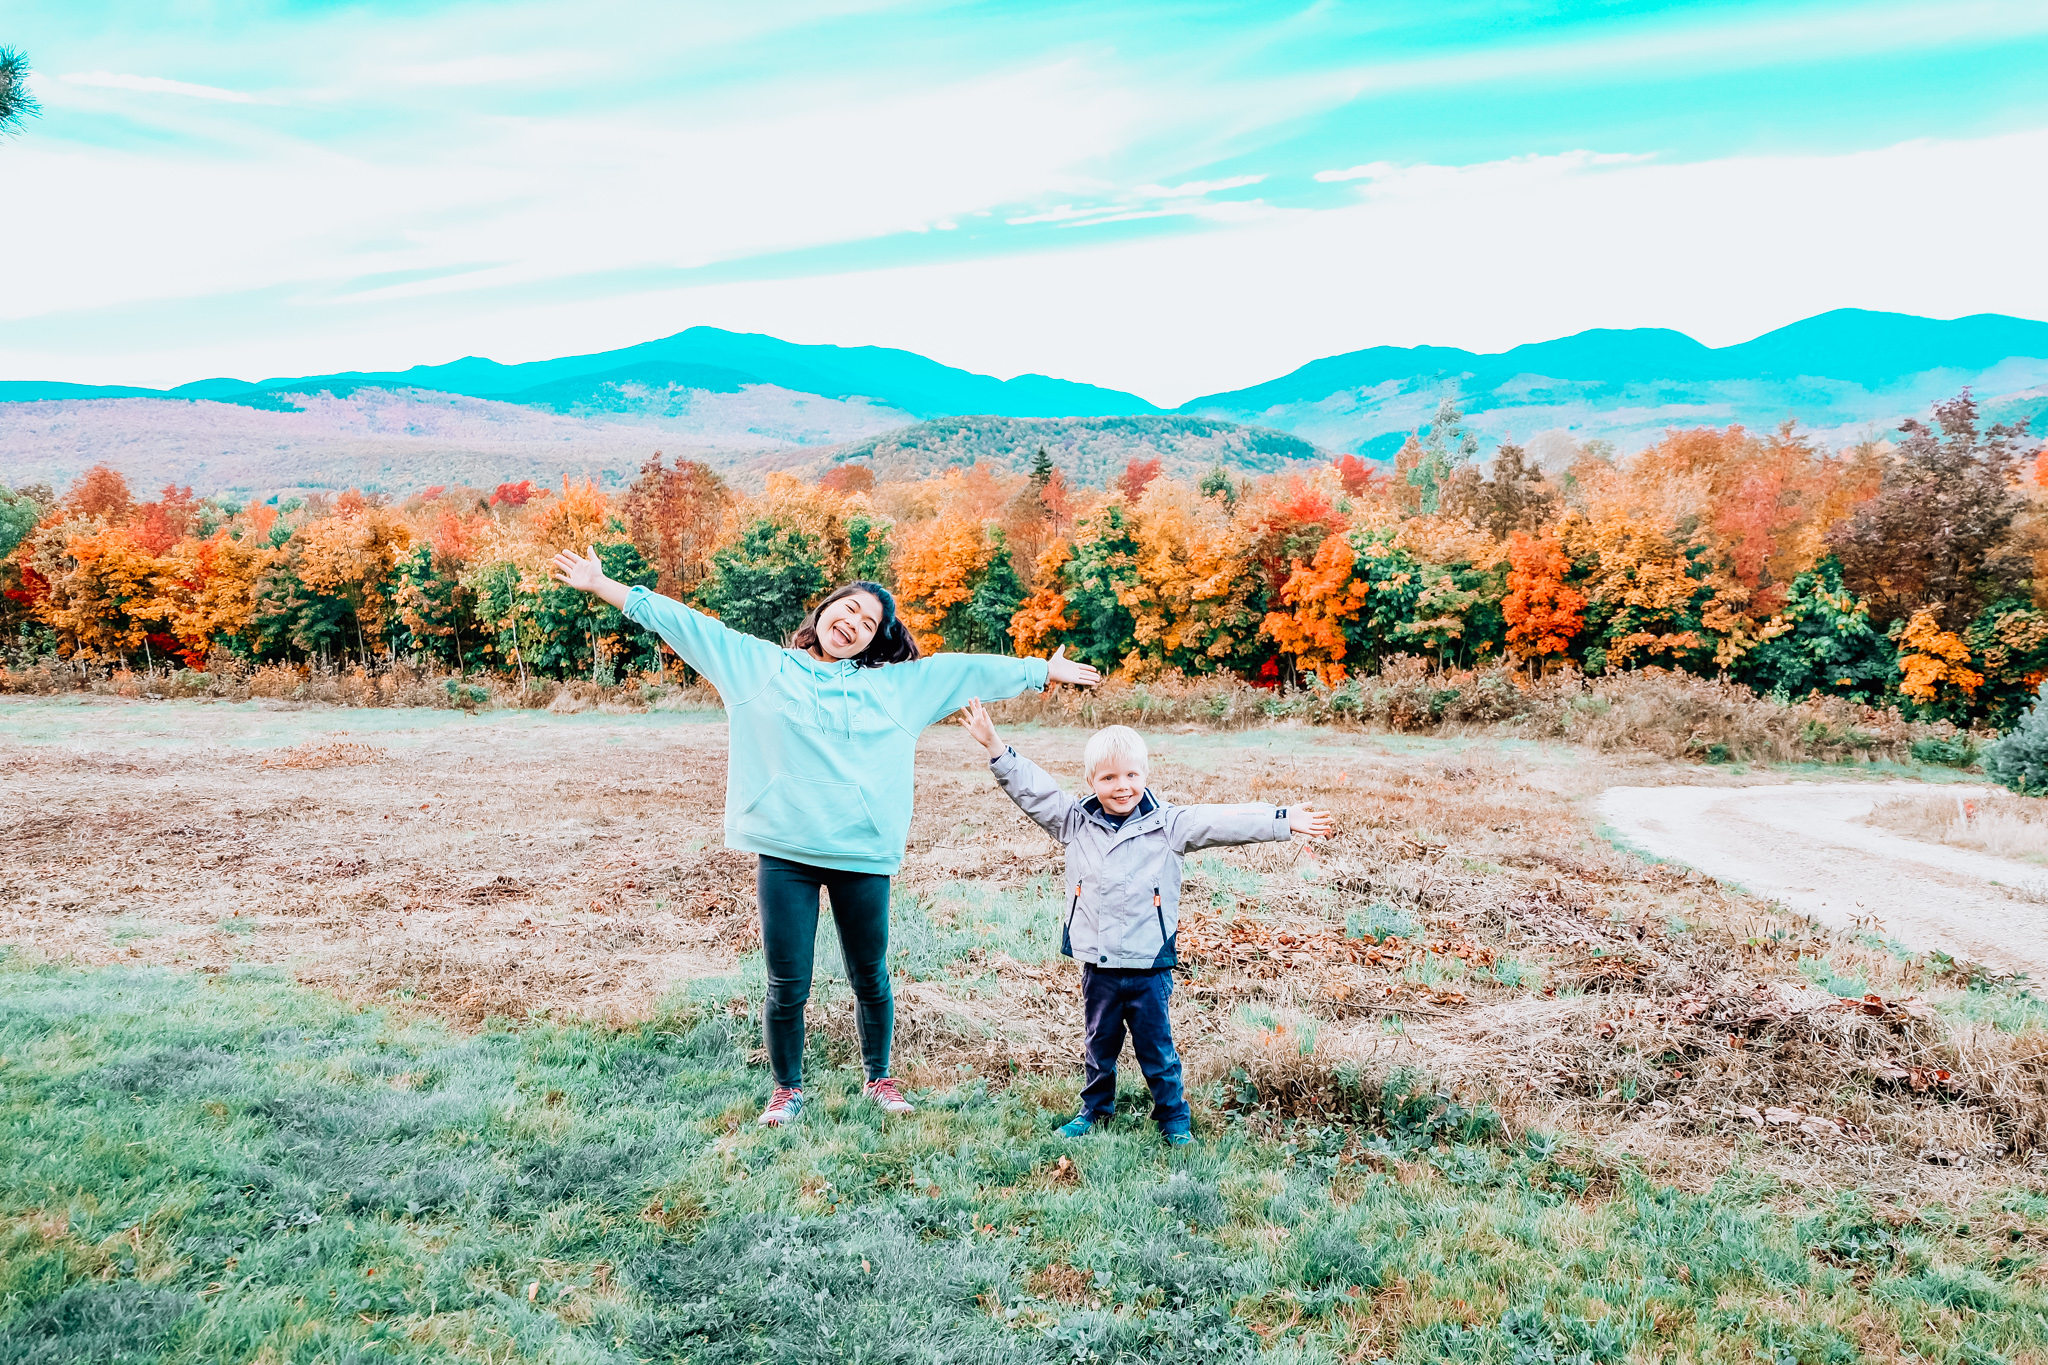 Au pair with host child in autumn foliage